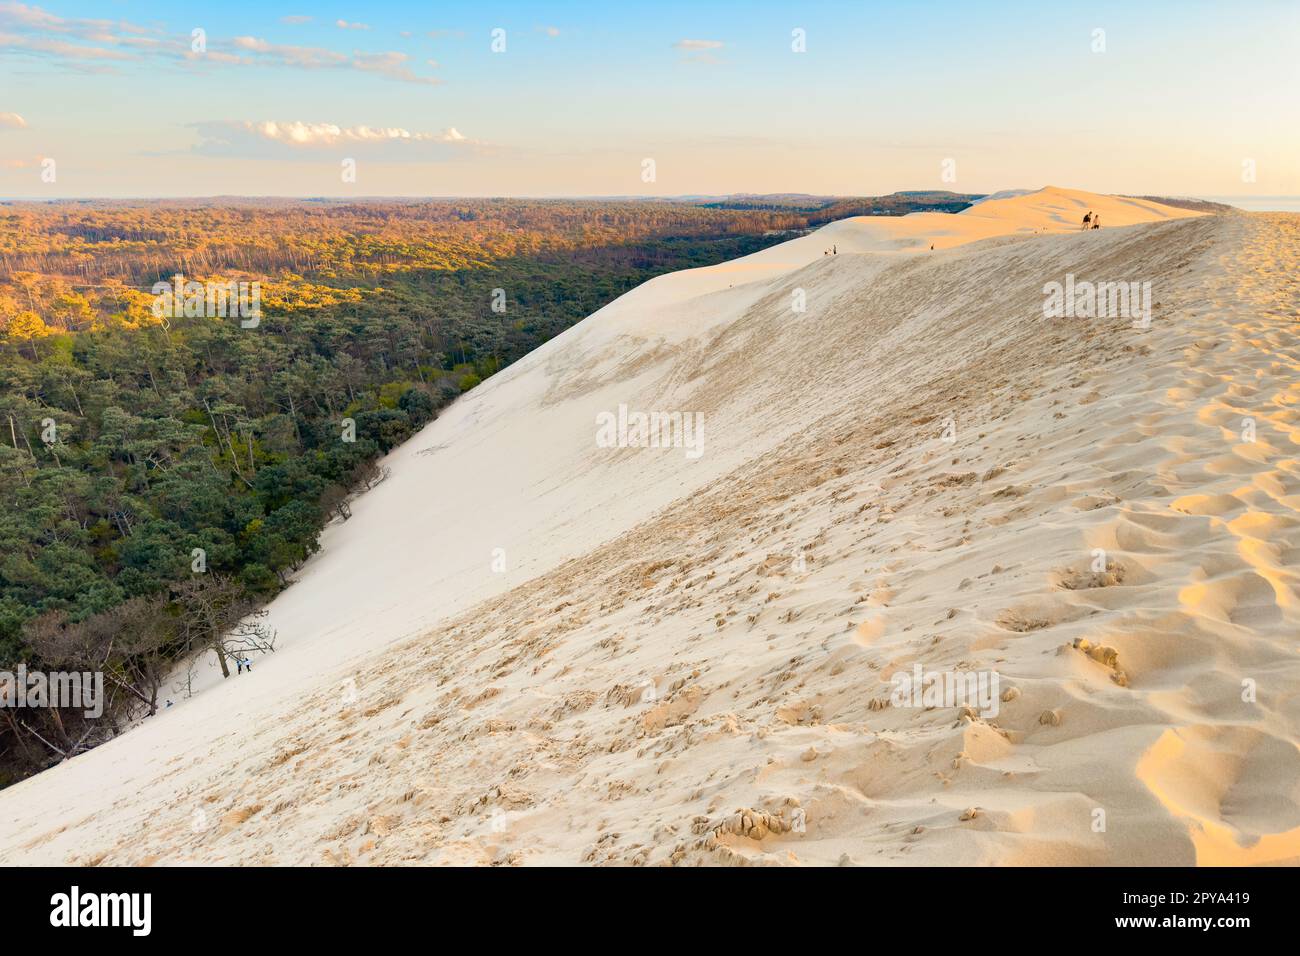 Dune du Pilat, the biggest sand dune in Europe, France. High quality photography. Stock Photo